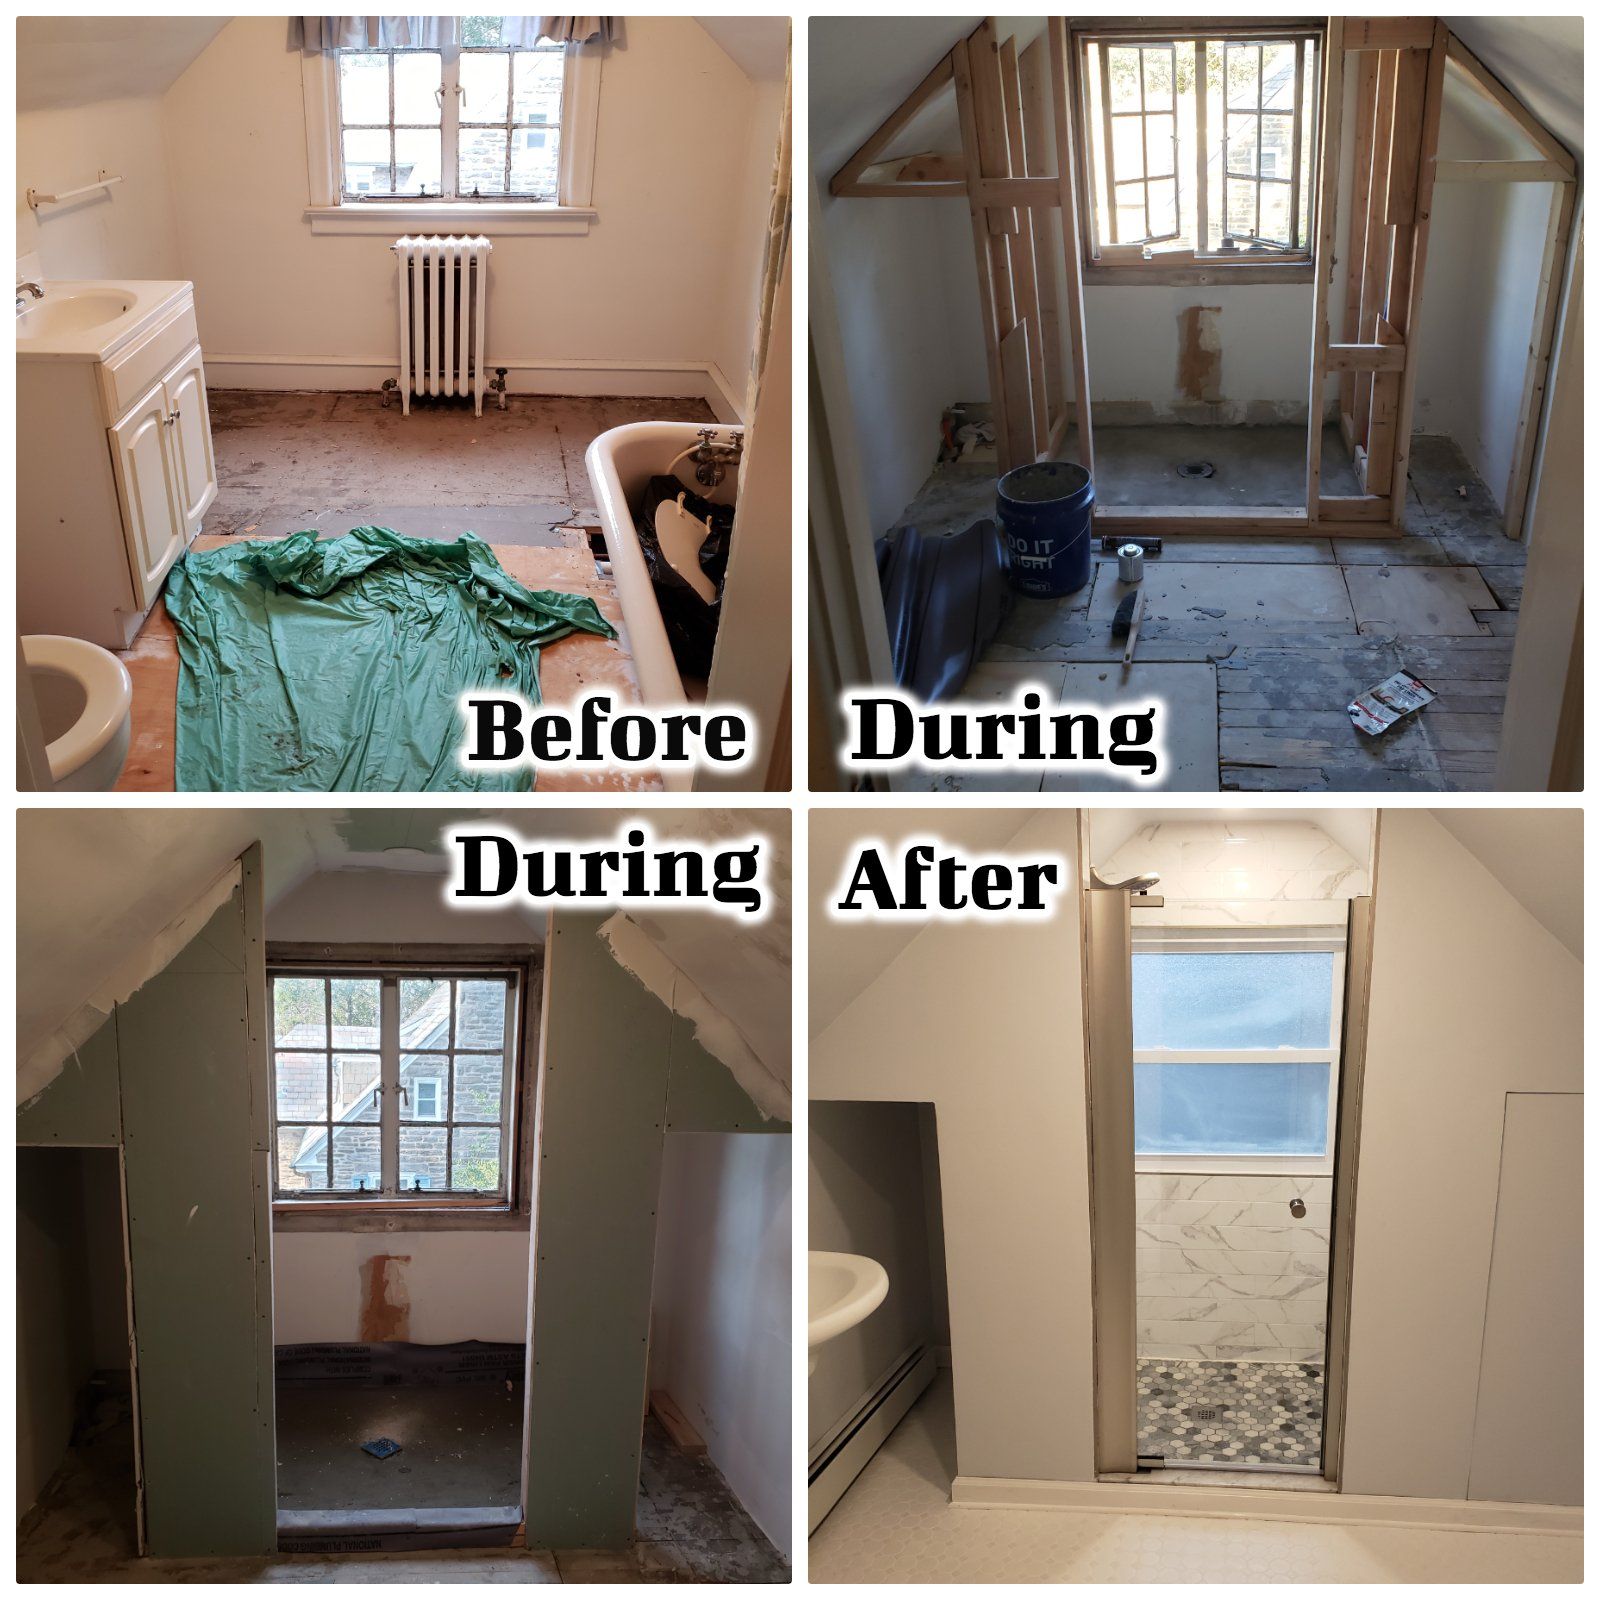 Before/during/after collage of Jenkintown bathroom remodel on third floor.